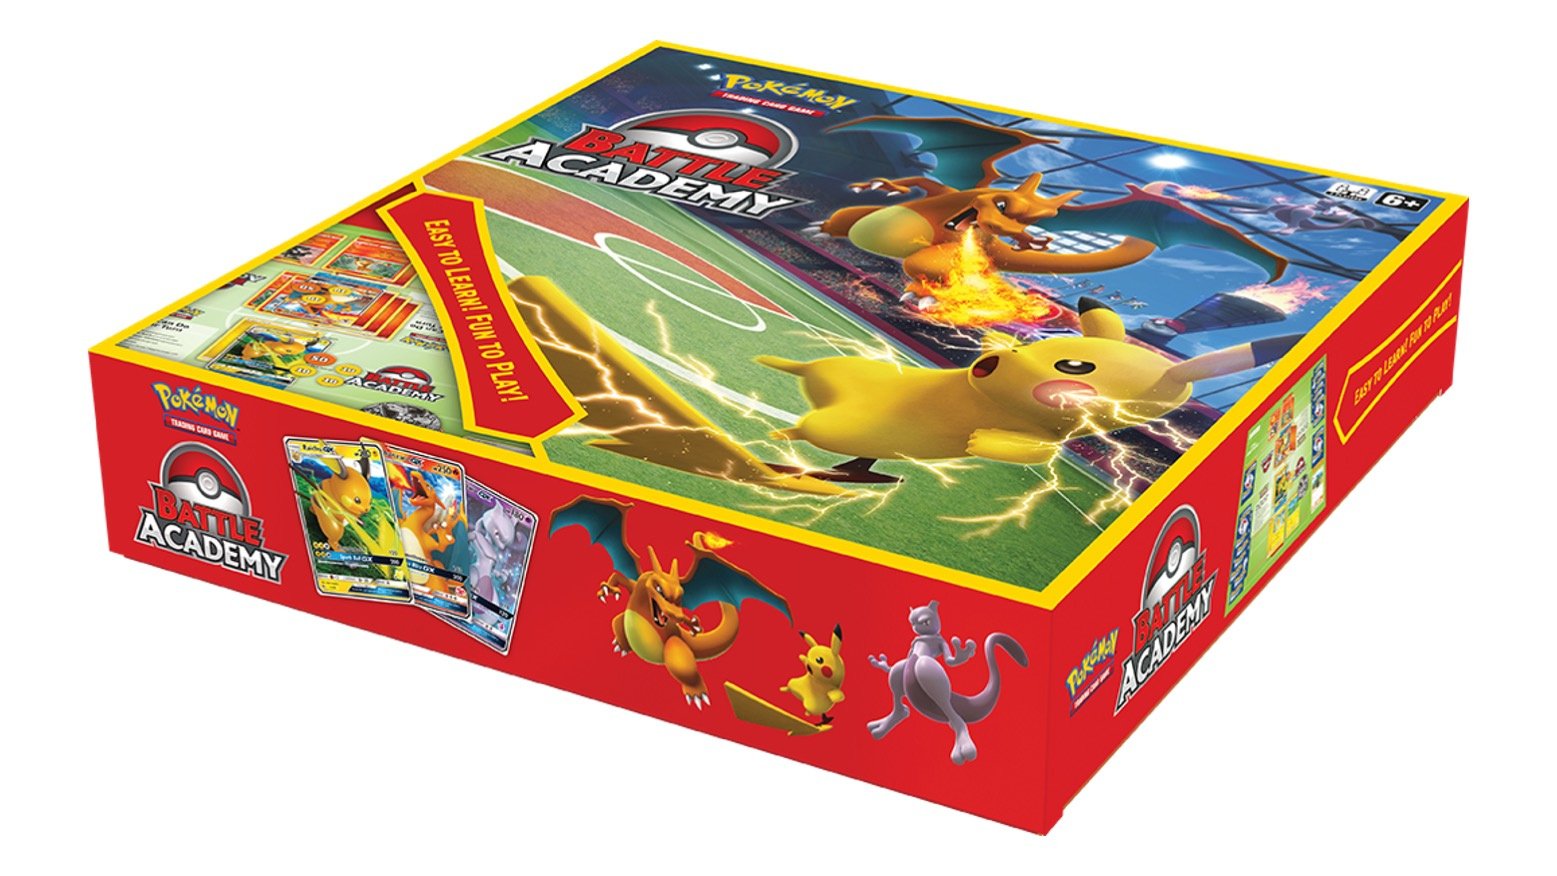 Official Pokémon Board Game Announced, Will Be Based On The Trading